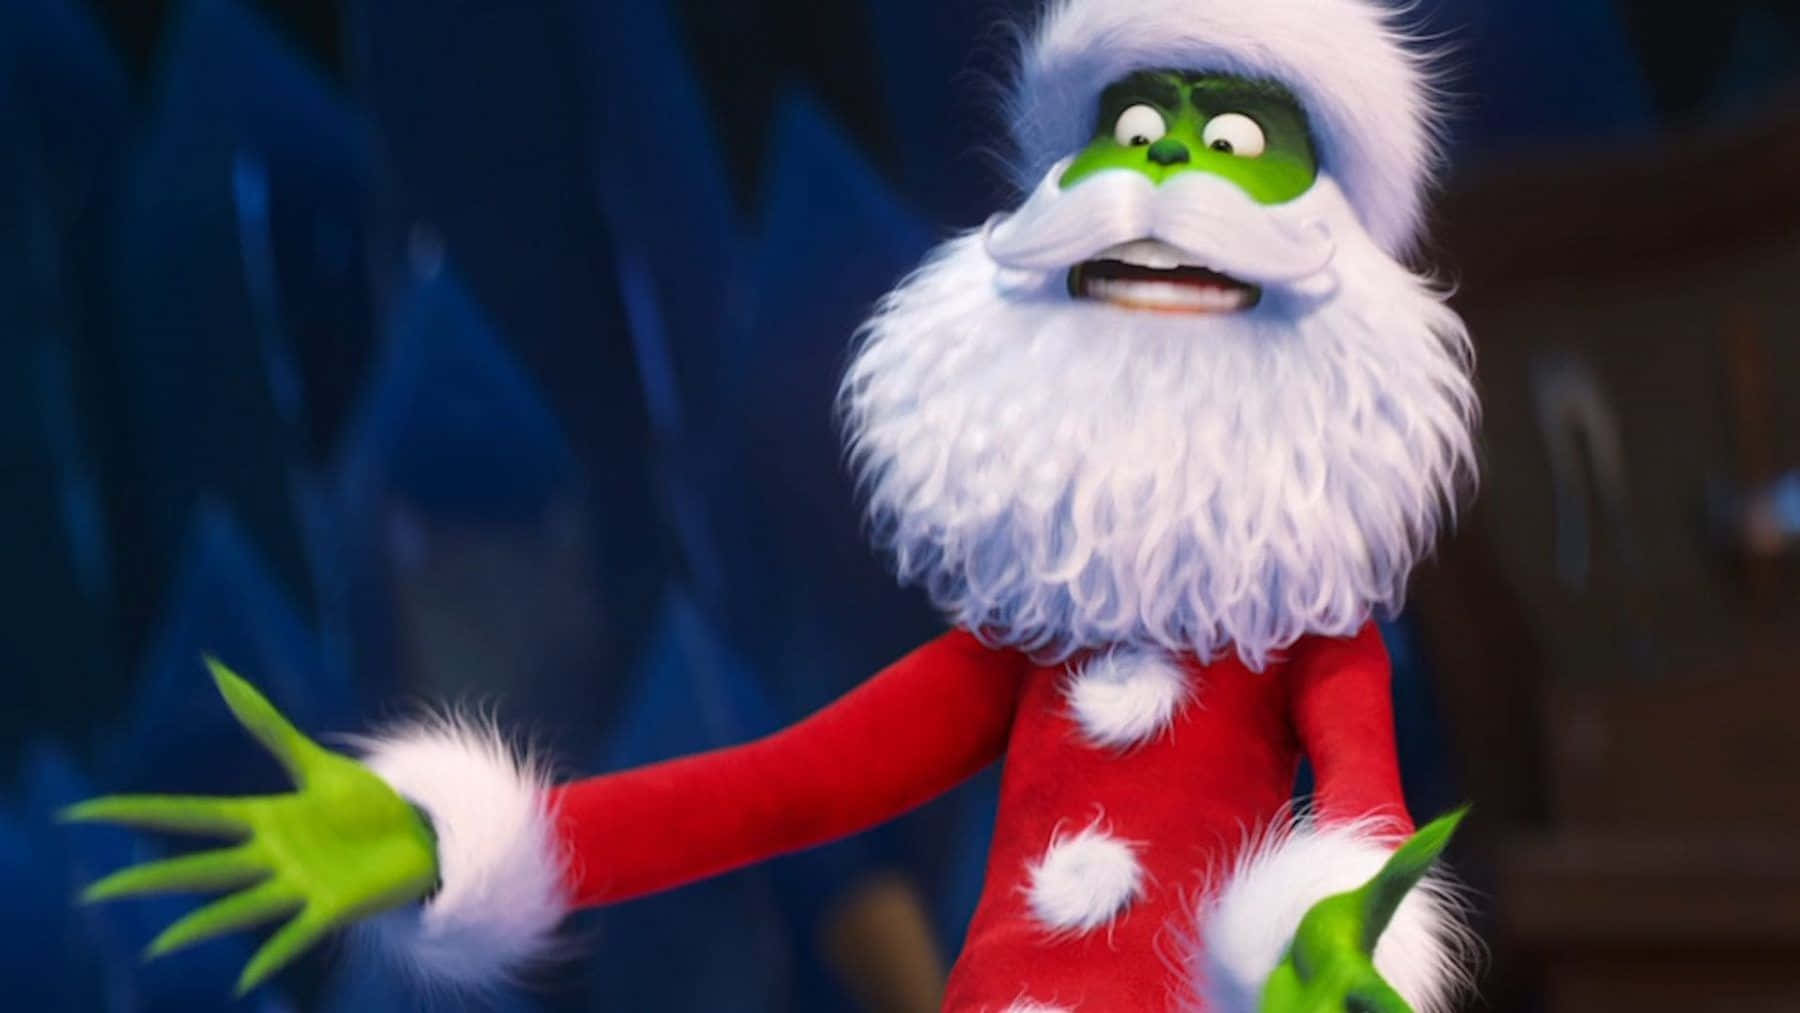 "Celebrate the holidays online with the Grinch!"